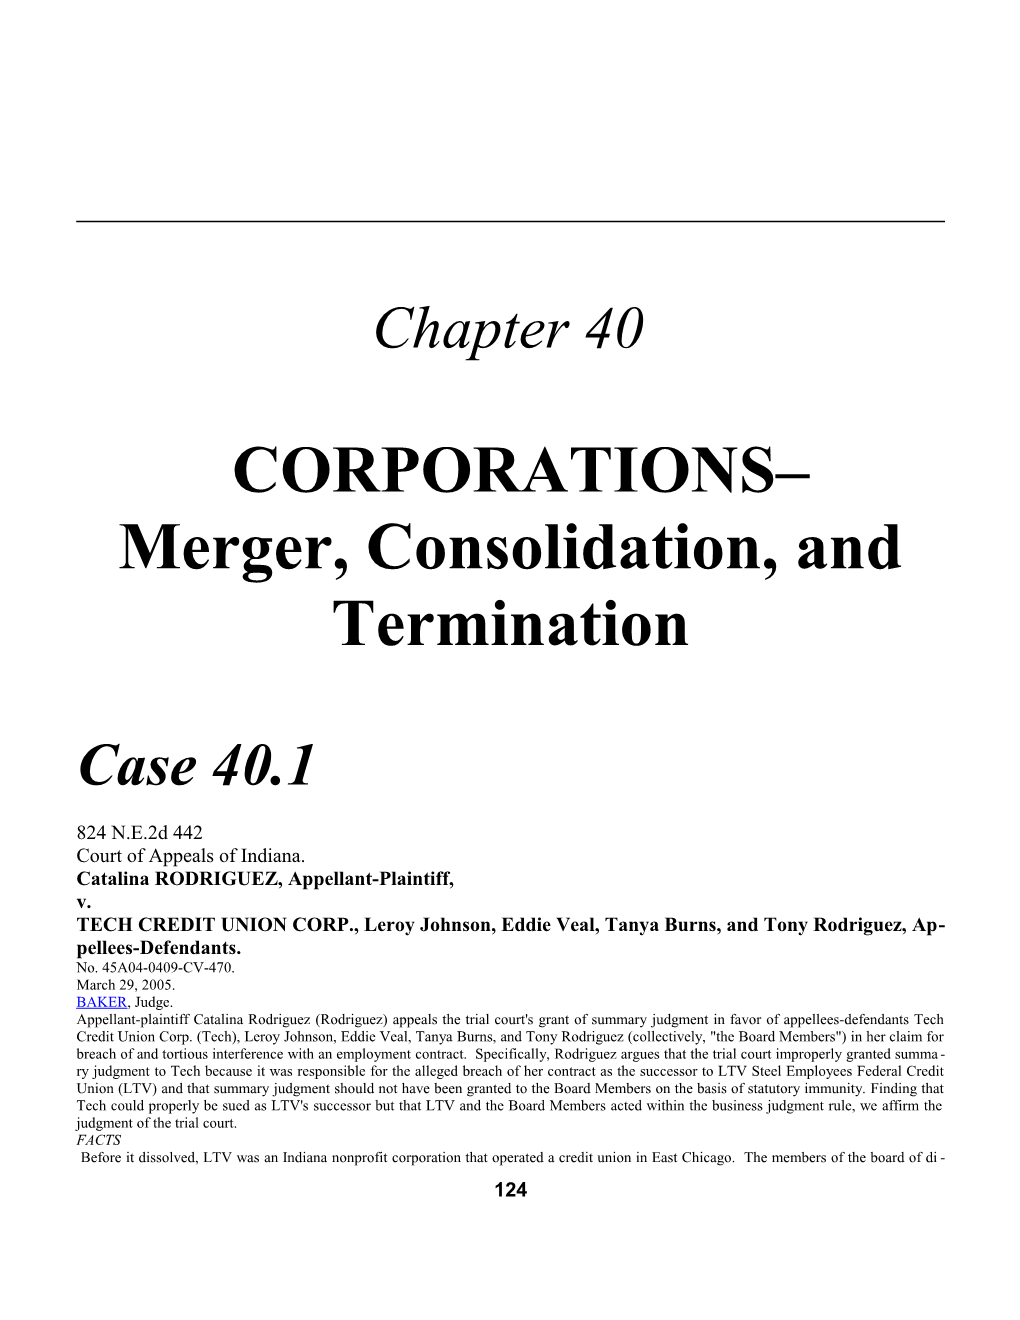 Merger, Consolidation, and Termination